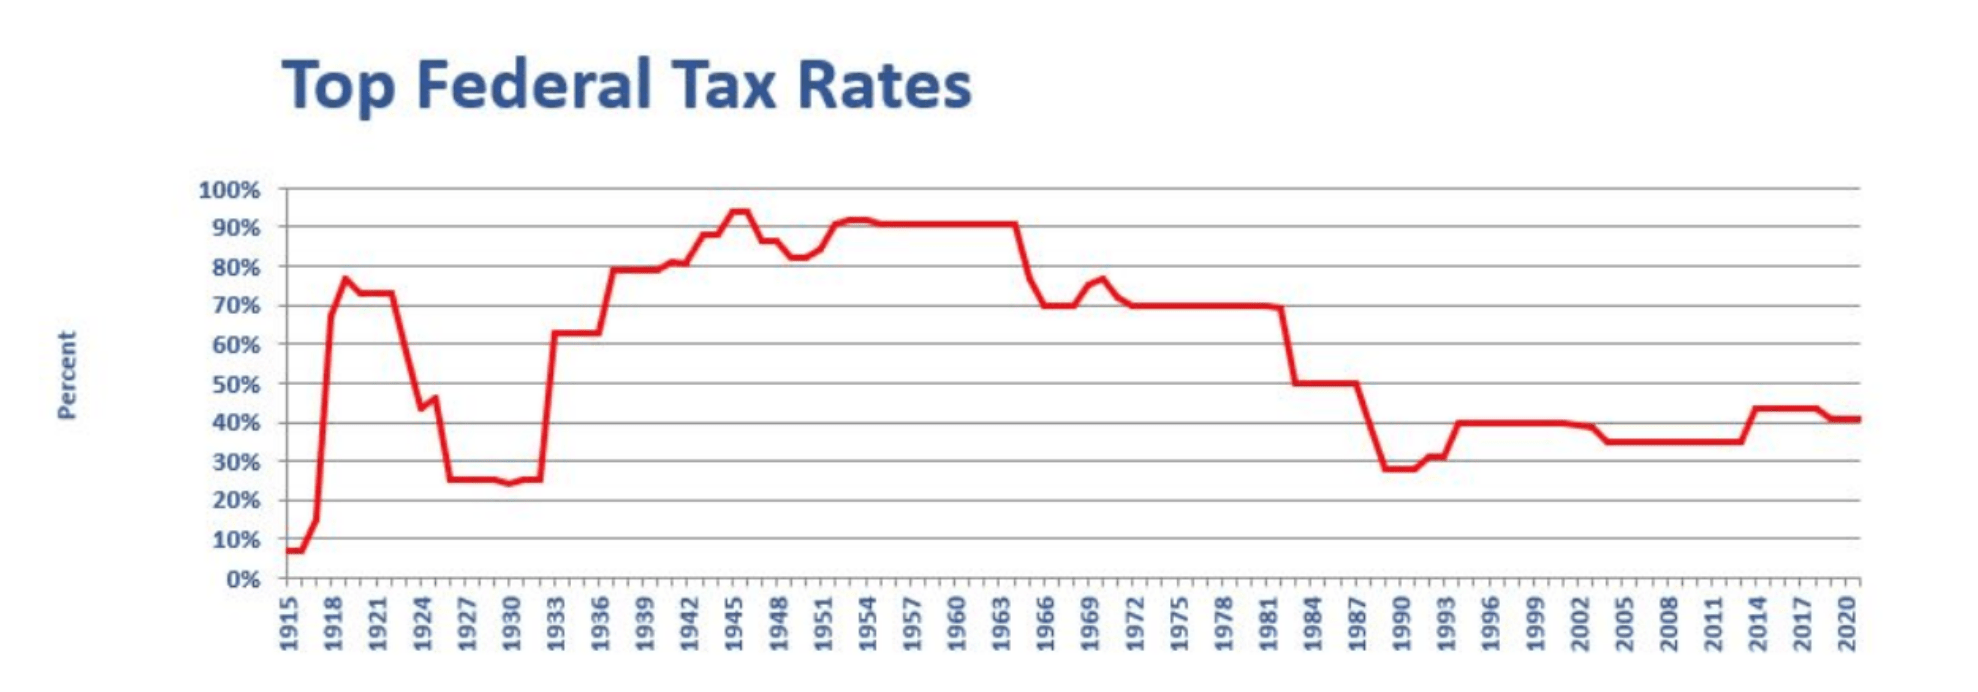 Top Federal Tax Rates